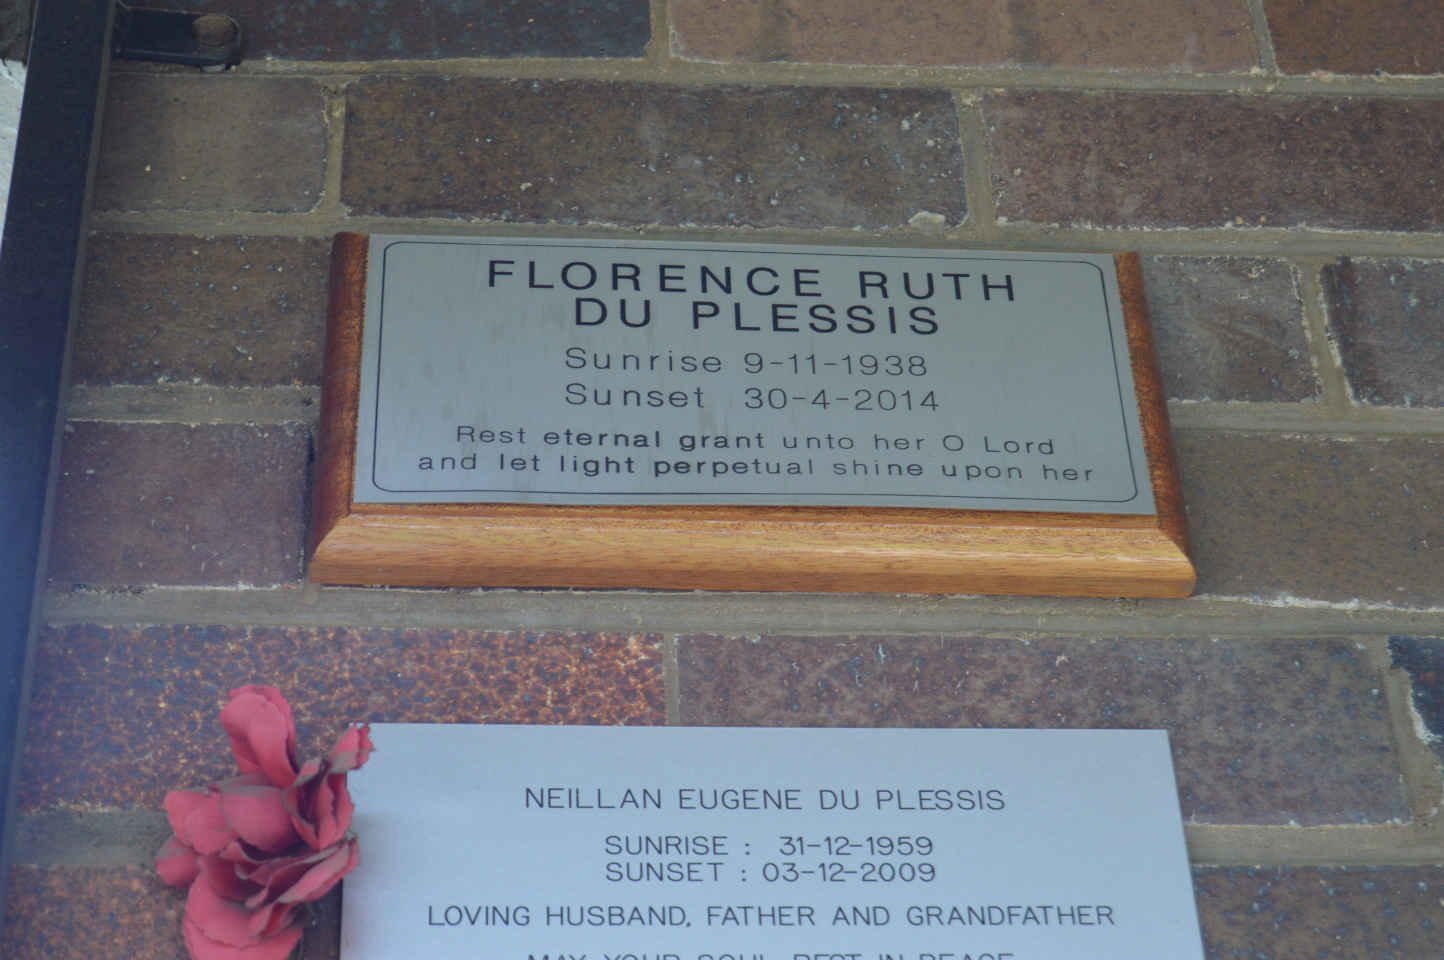 PLESSIS Florence Ruth, du 1938-2014